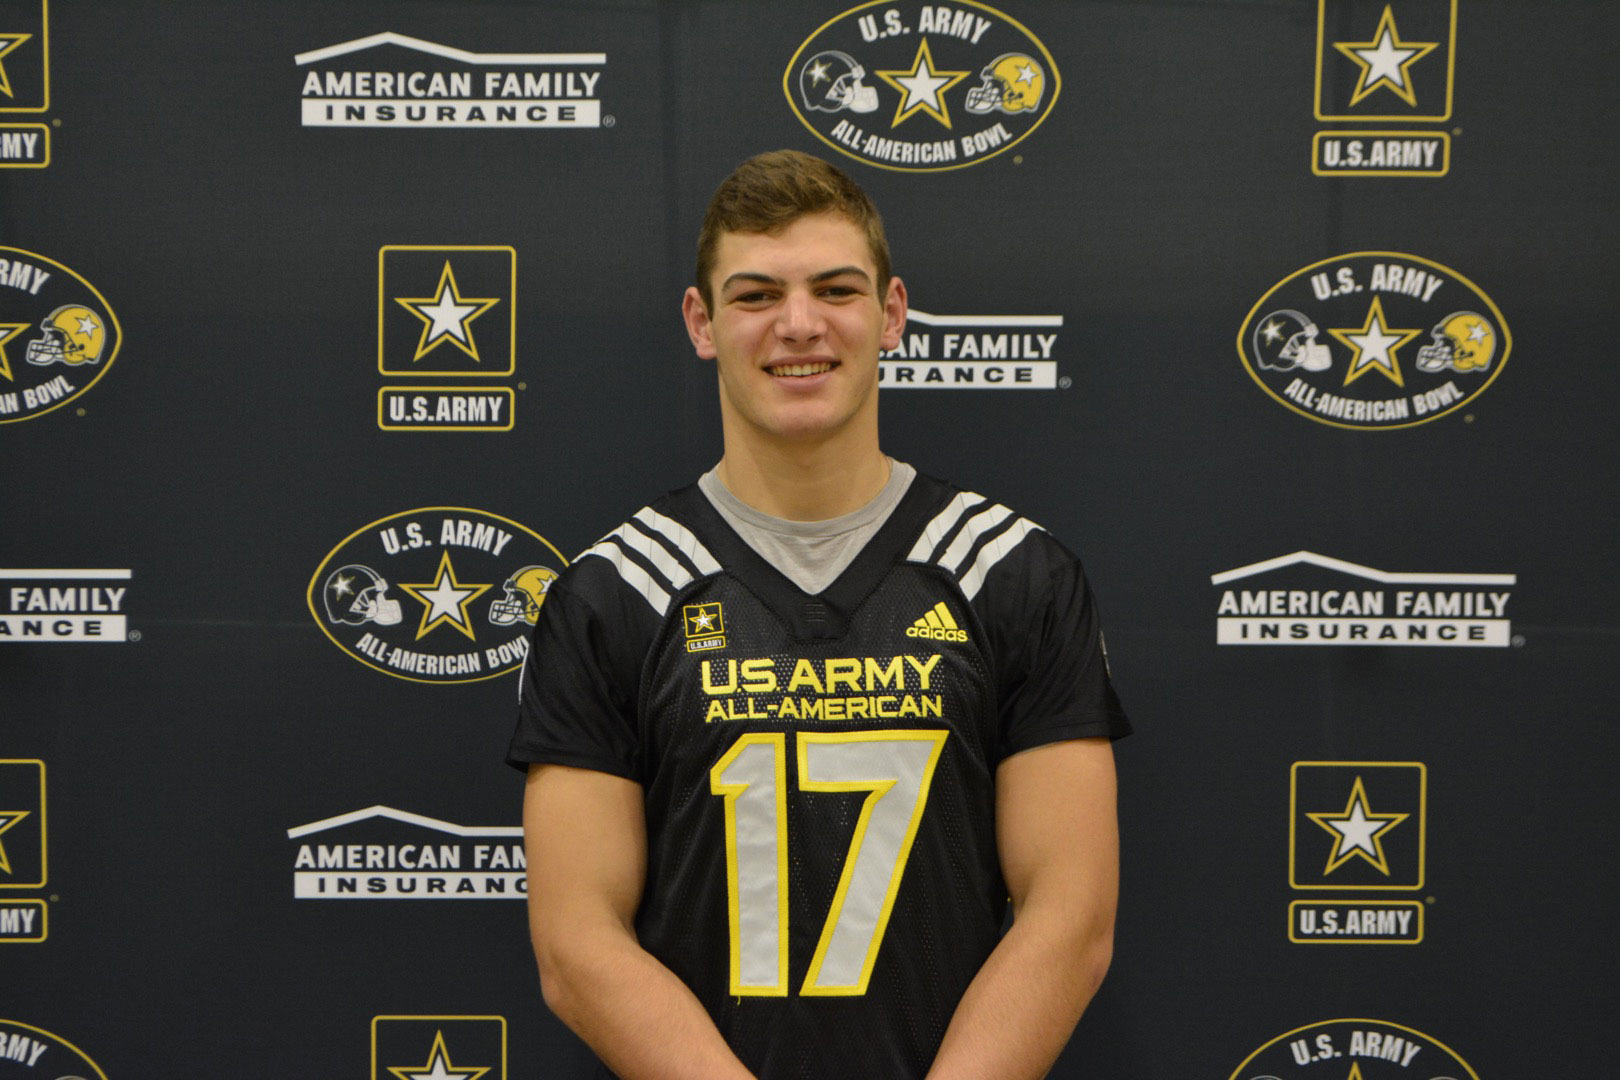 Cole Kmet relishes being first U.S. Army All-American from his